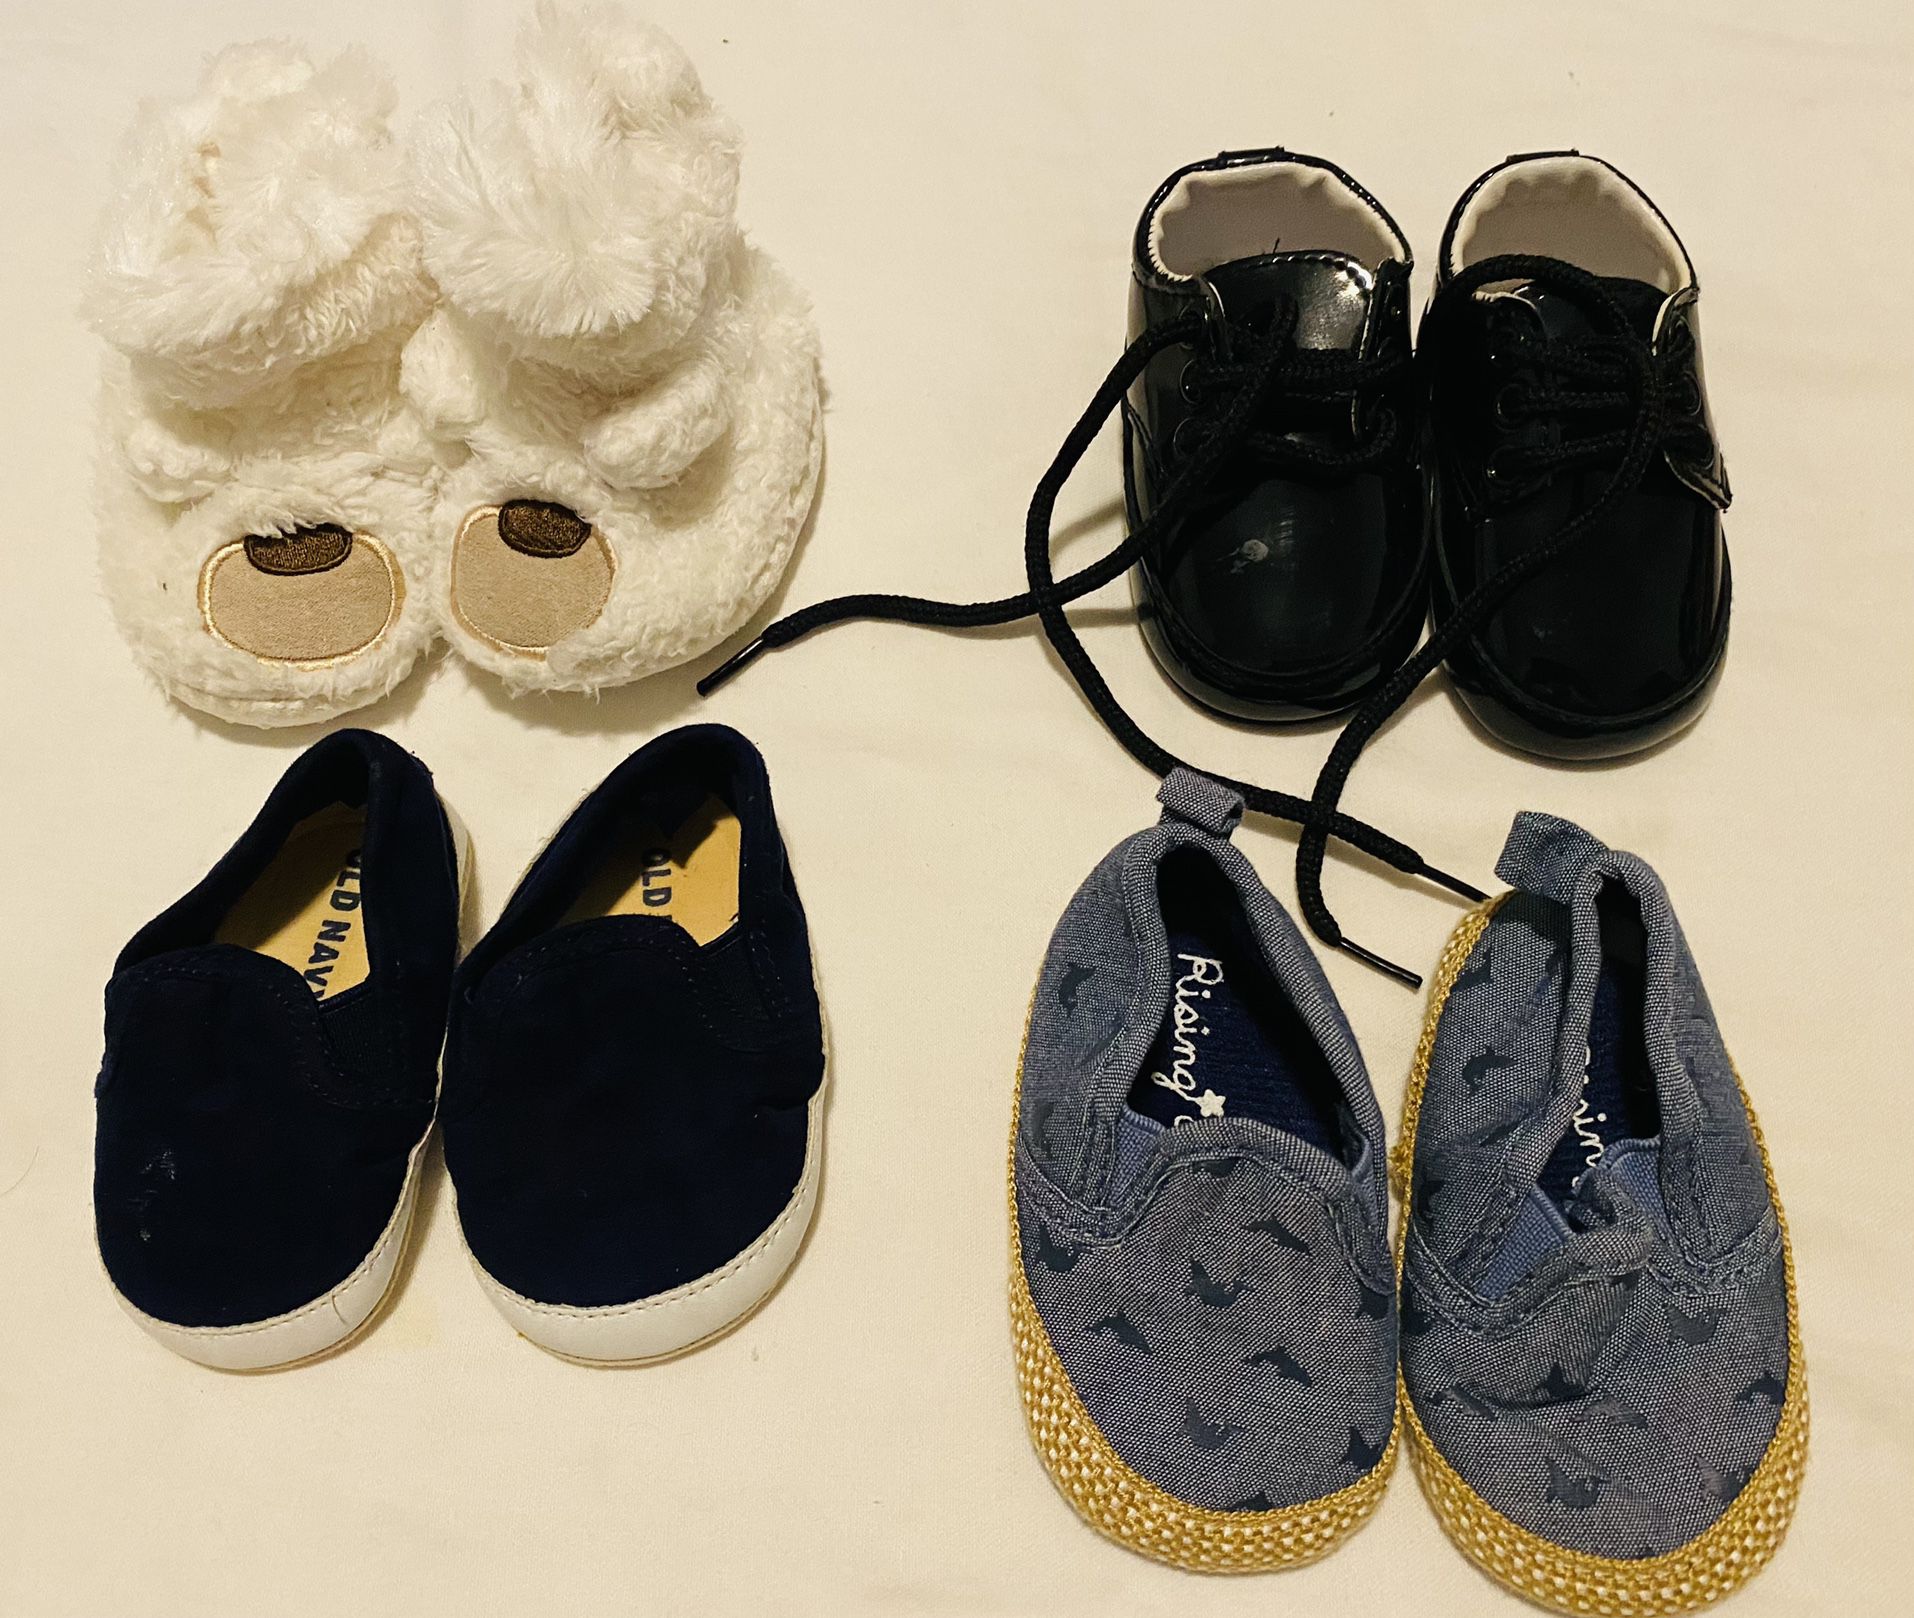 Four Pair Of Baby Shoes Size 0-3 Months for Sale in The Bronx, NY